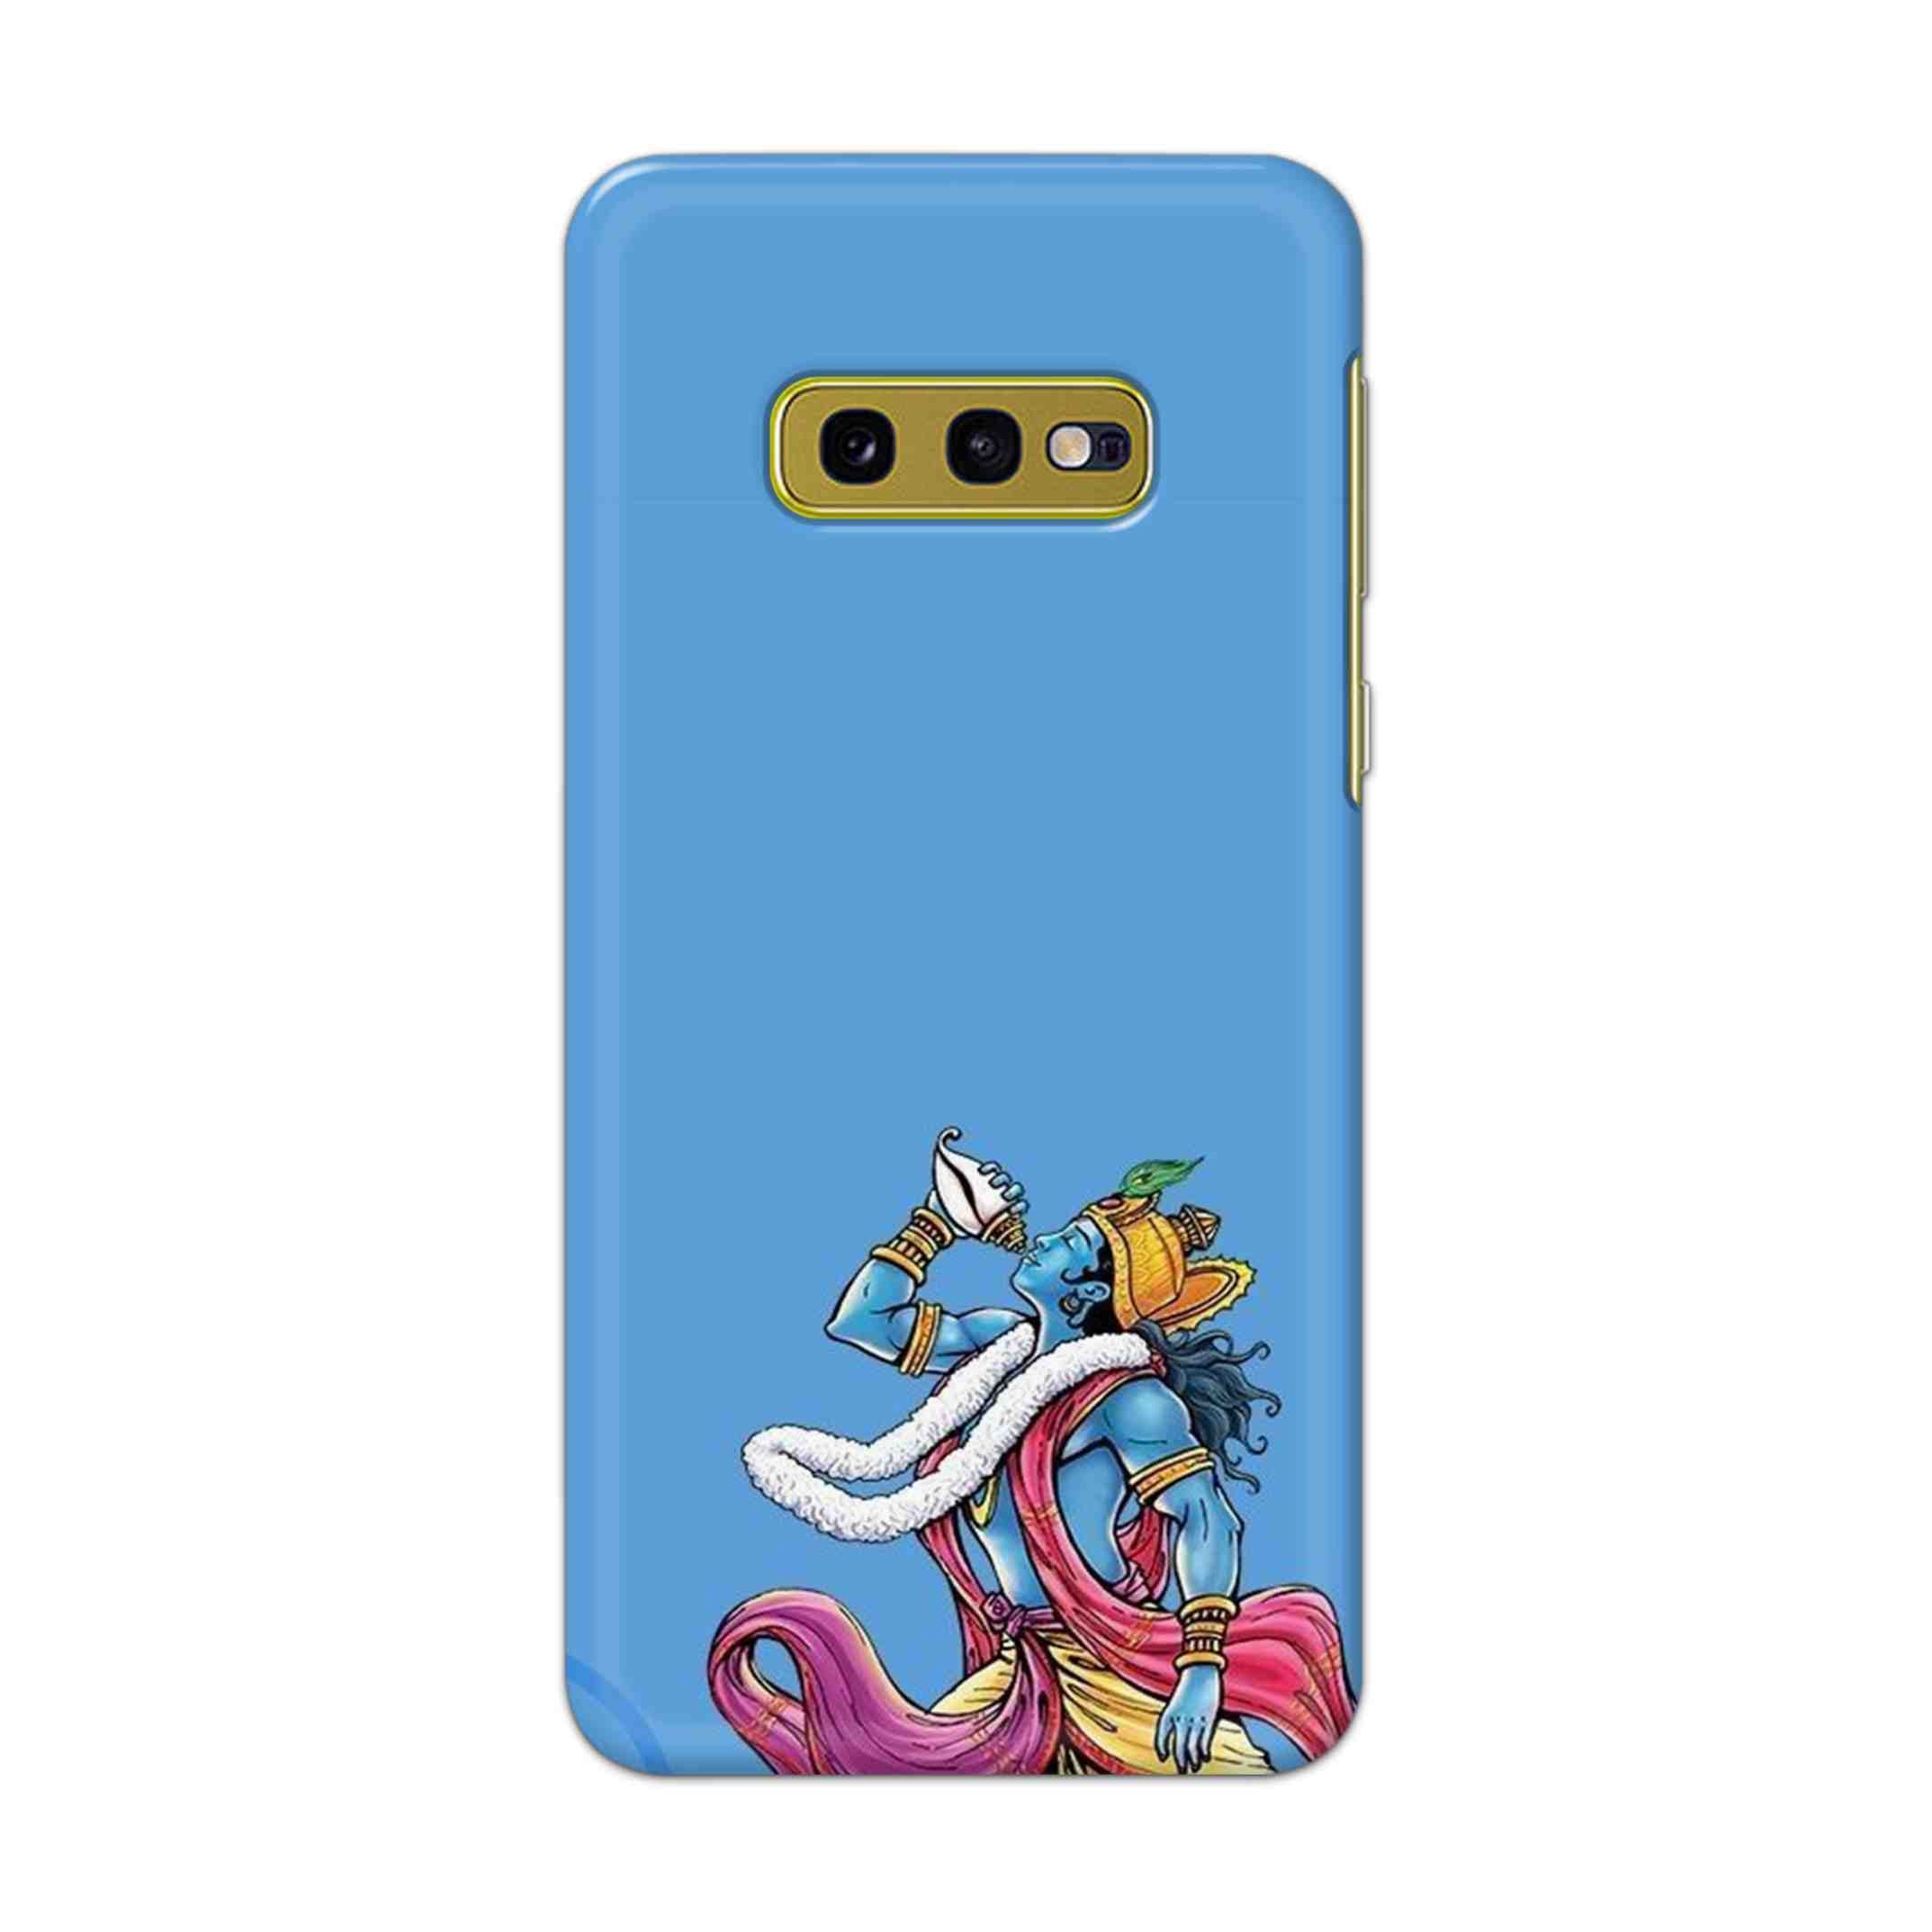 Buy Krishna Hard Back Mobile Phone Case Cover For Samsung Galaxy S10e Online